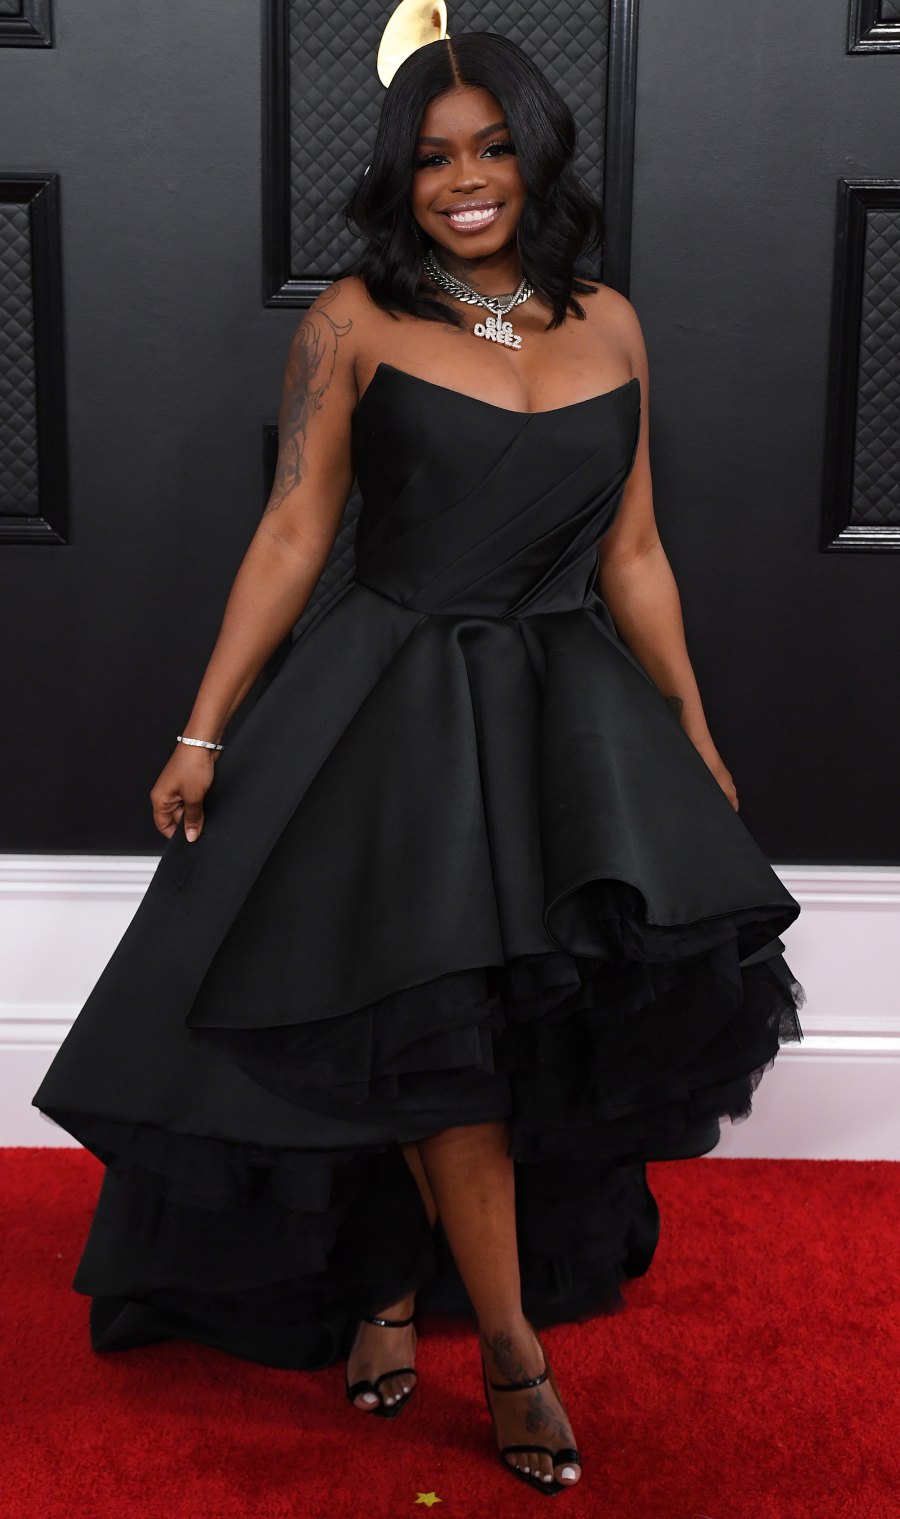 Grammys 2020 Red Carpet: See Celeb Dresses, Gowns, Fashion